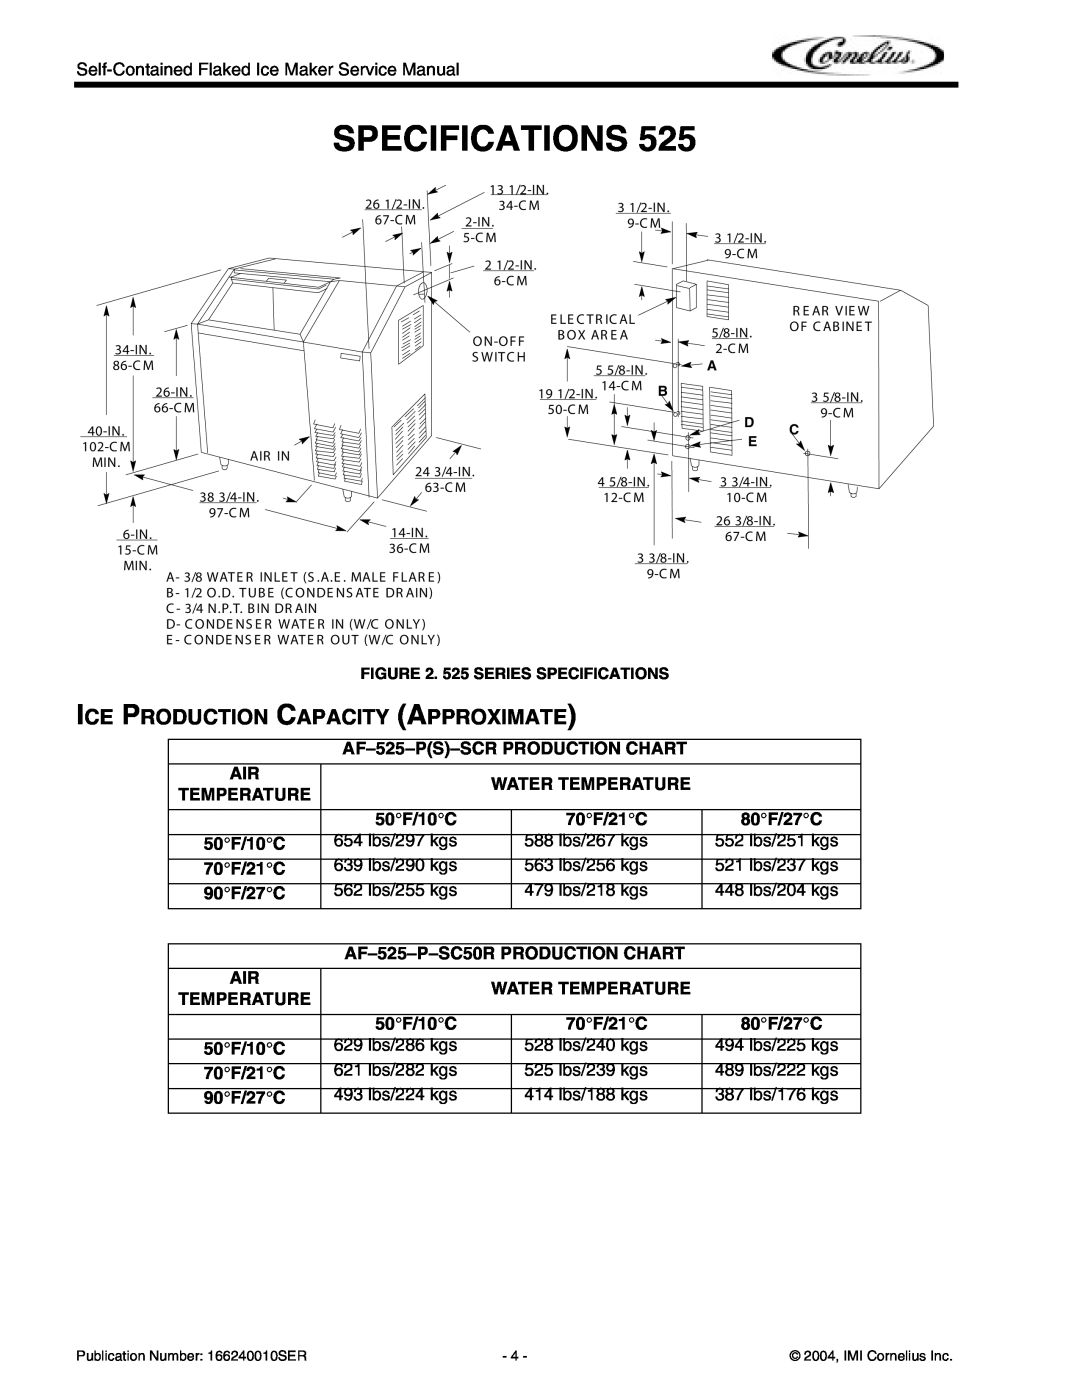 Cornelius Series 725, Series 525, Series 200 Specifications, Ice Production Capacity Approximate, 525 SERIES SPECIFICATIONS 